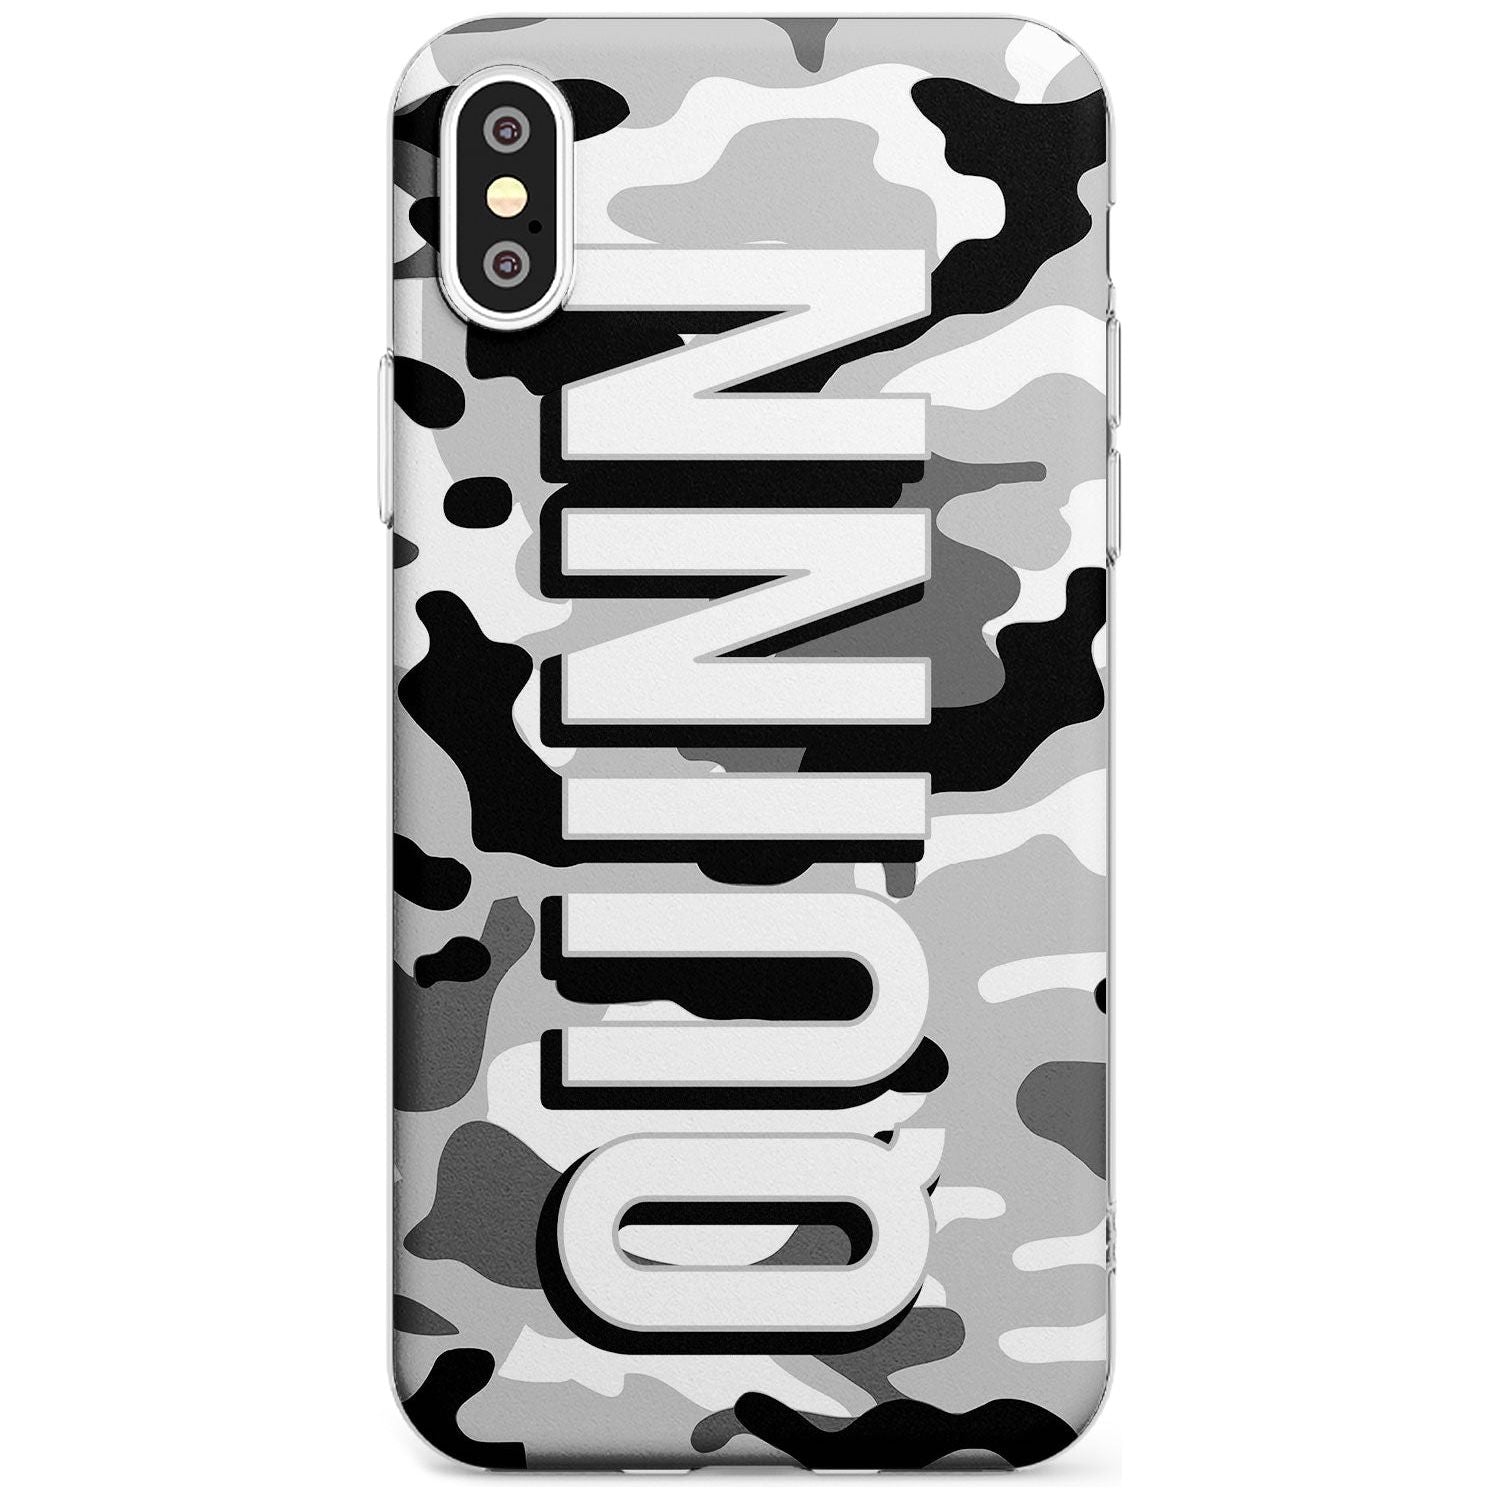 Greyscale Camo Black Impact Phone Case for iPhone X XS Max XR